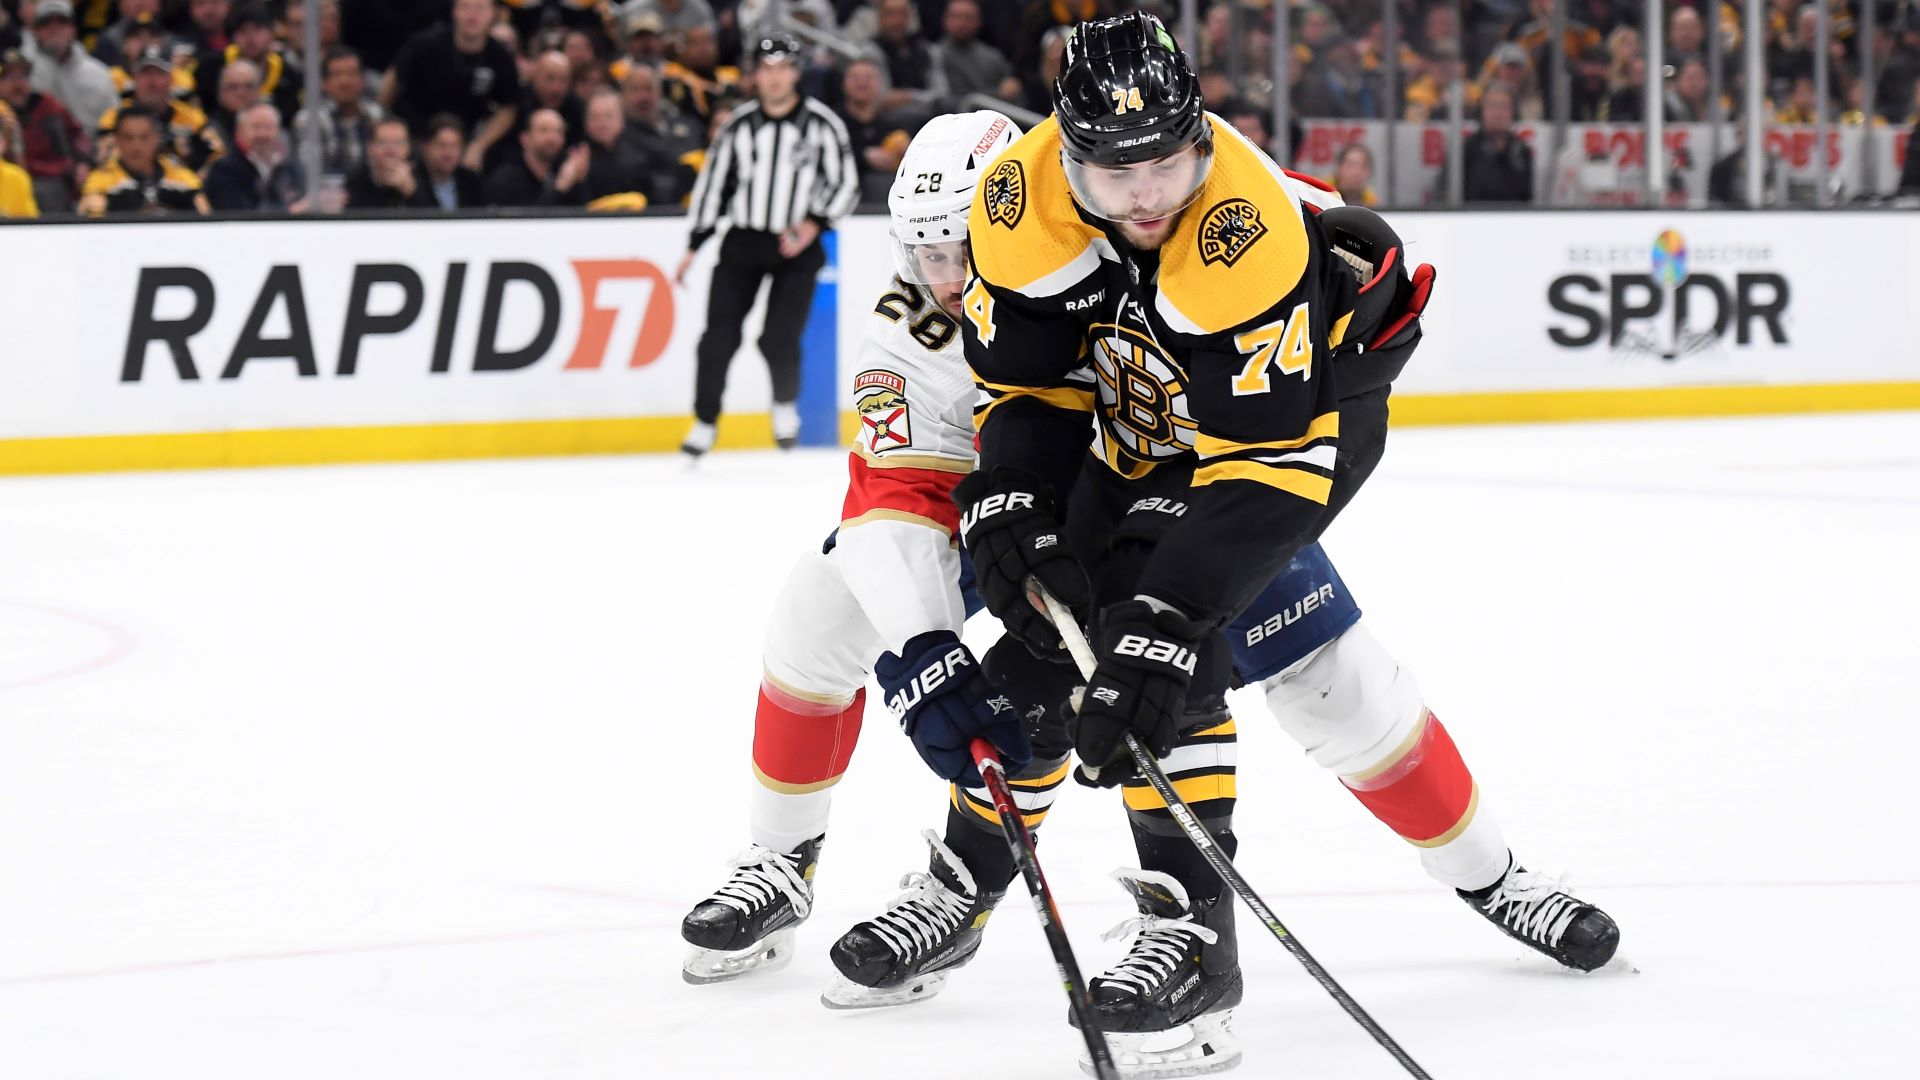 Jake DeBrusk hopes to avoid free agency, re-sign with Bruins